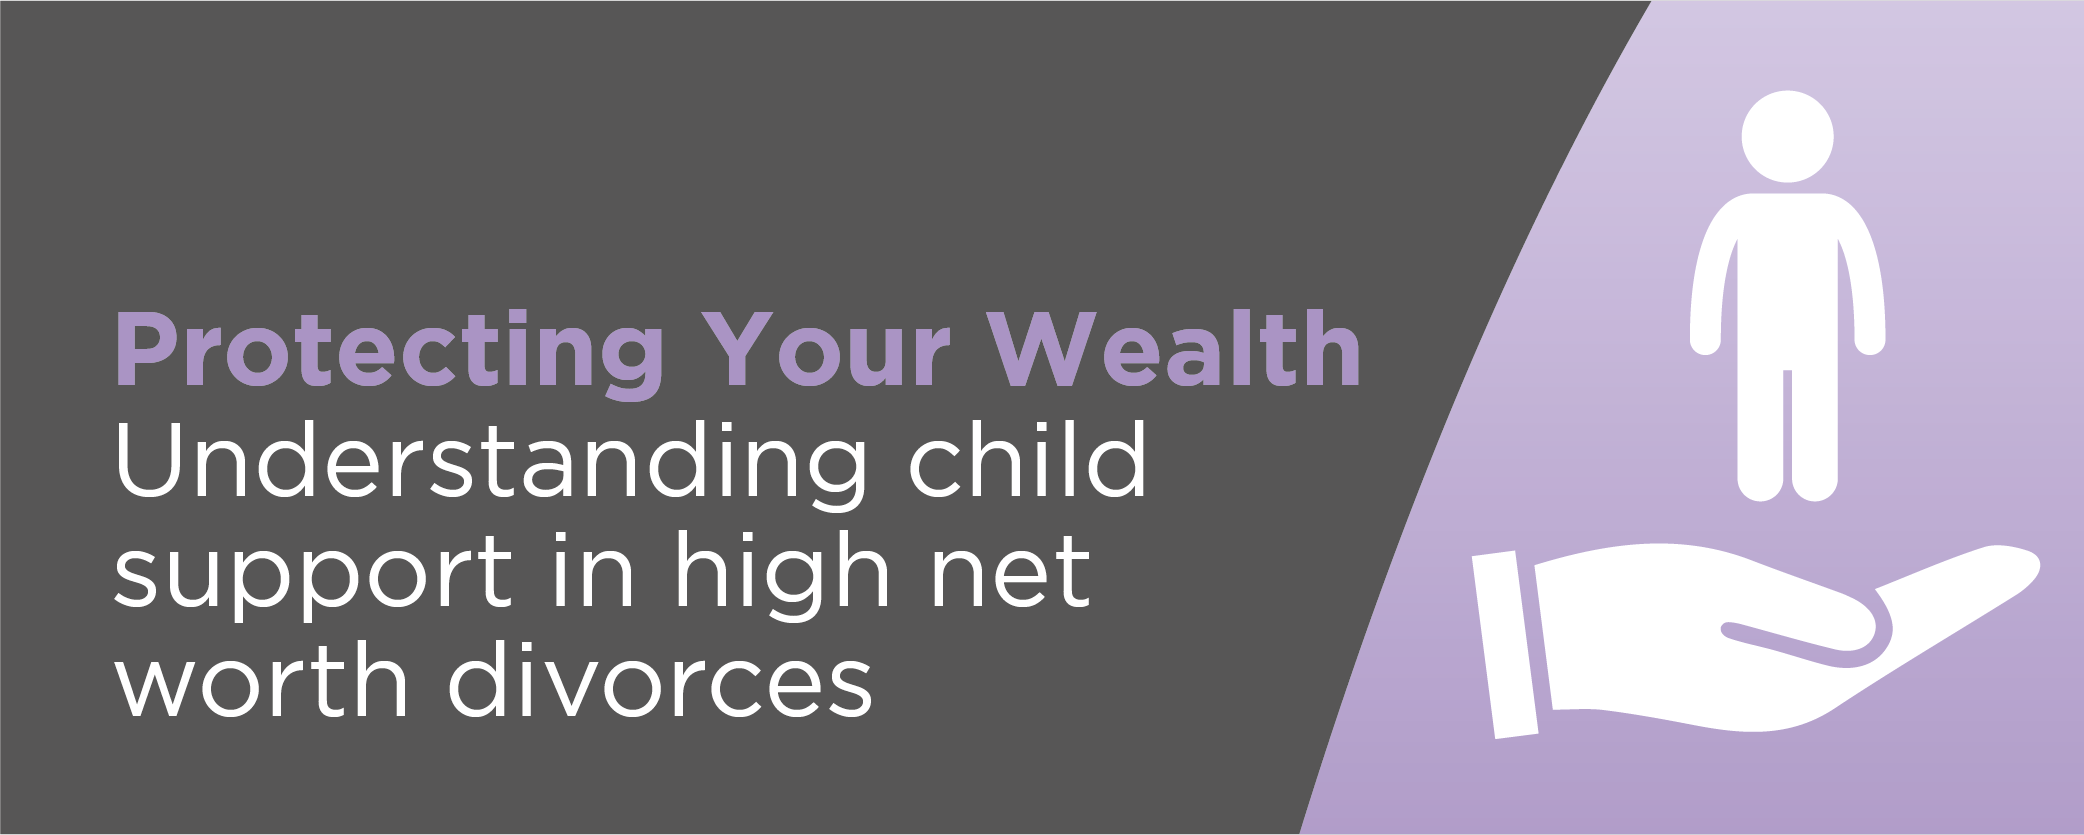 Protecting Your Wealth: Understanding child support in high net worth divorces